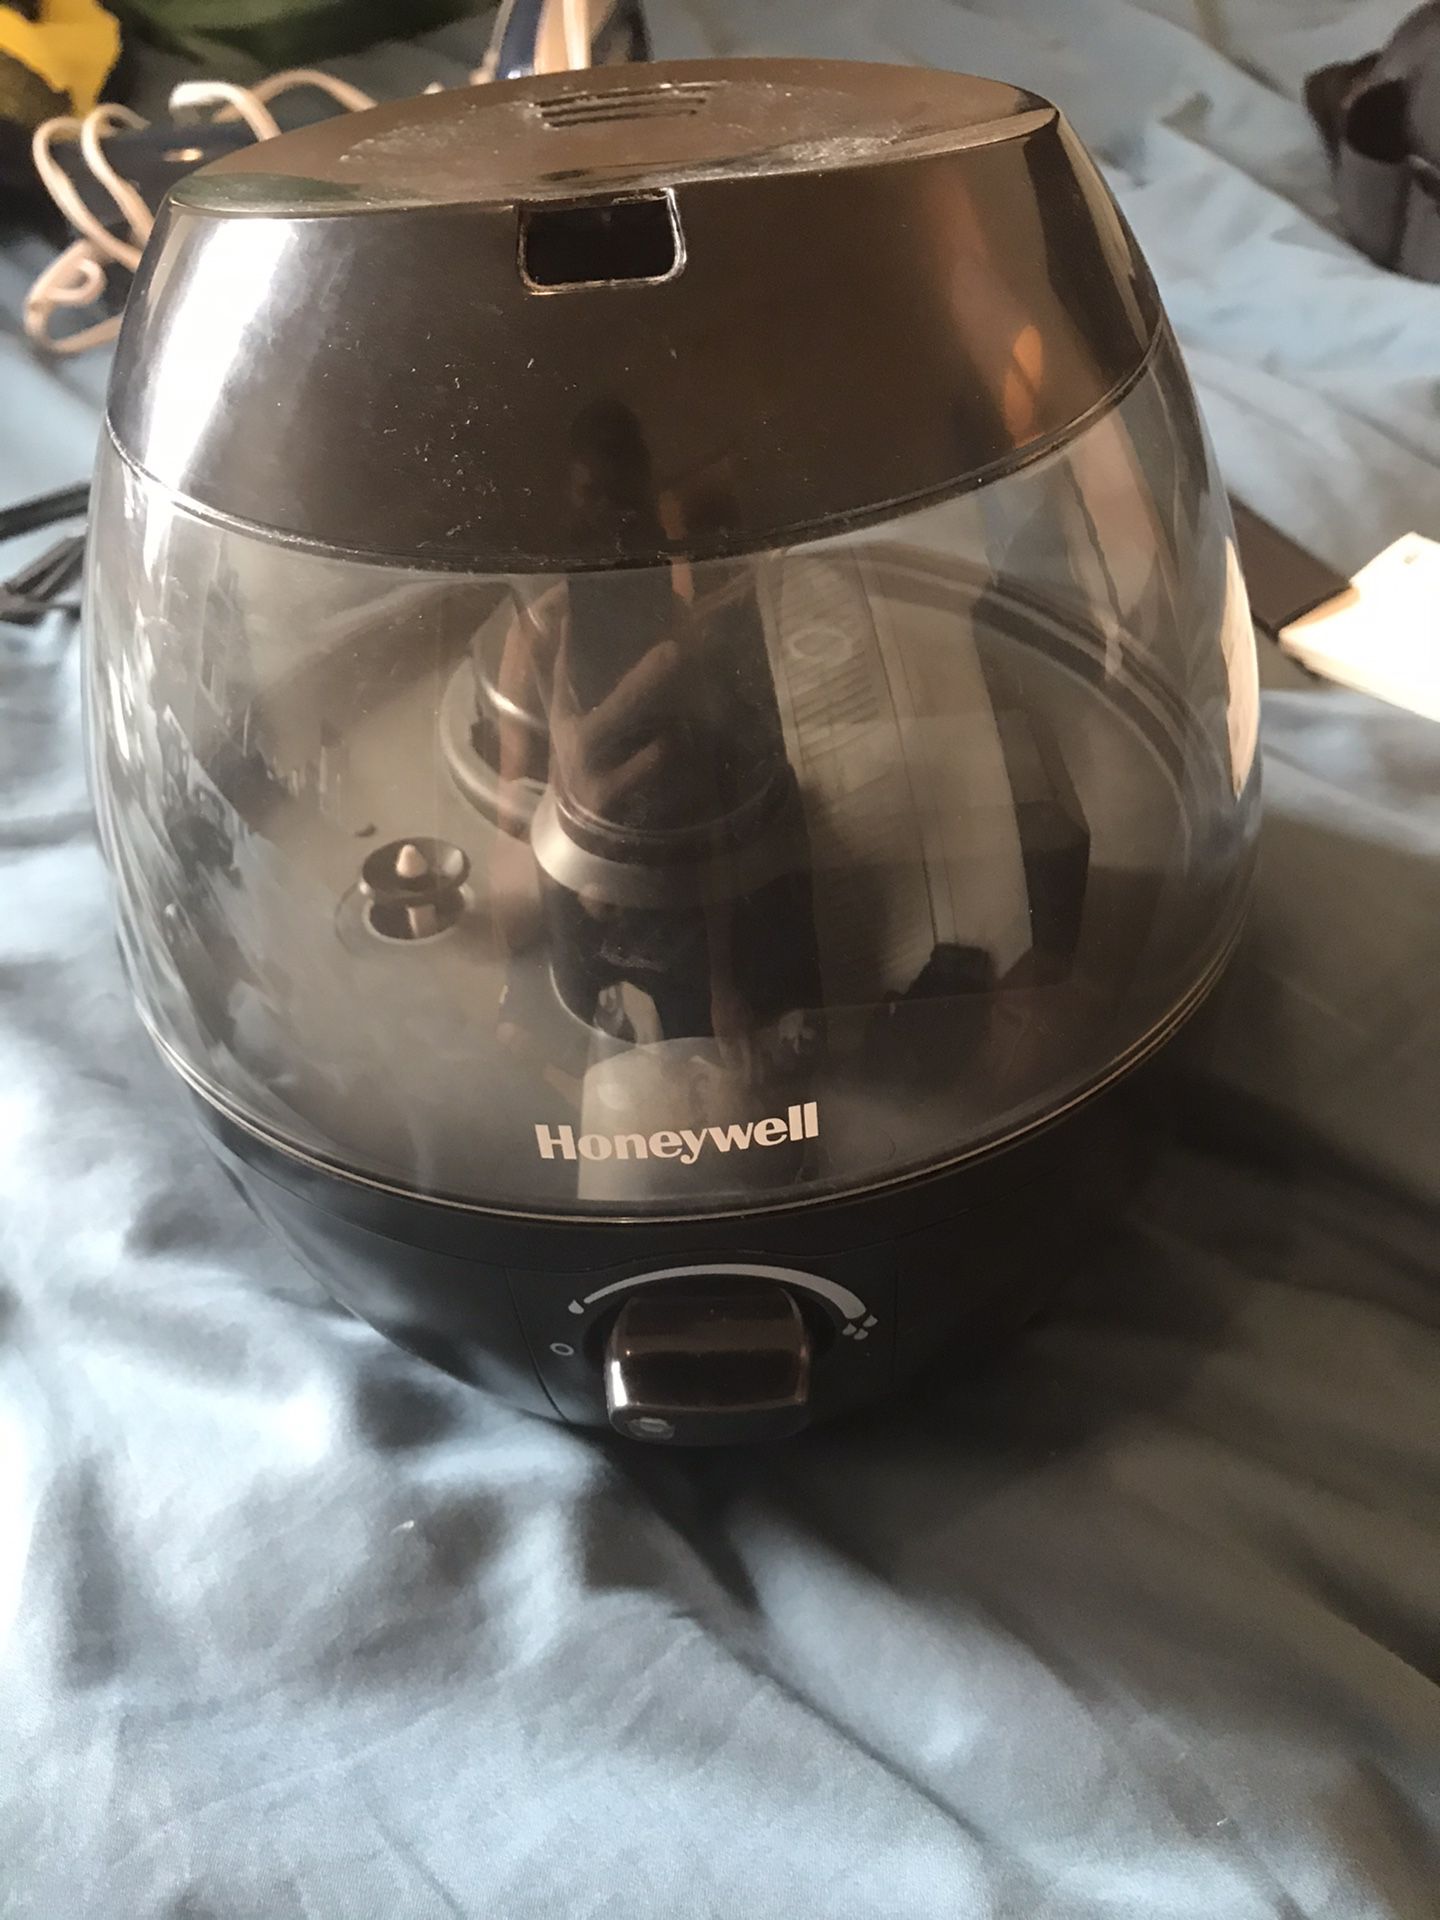 Honeywell Humidifier - Perfect for Winter!